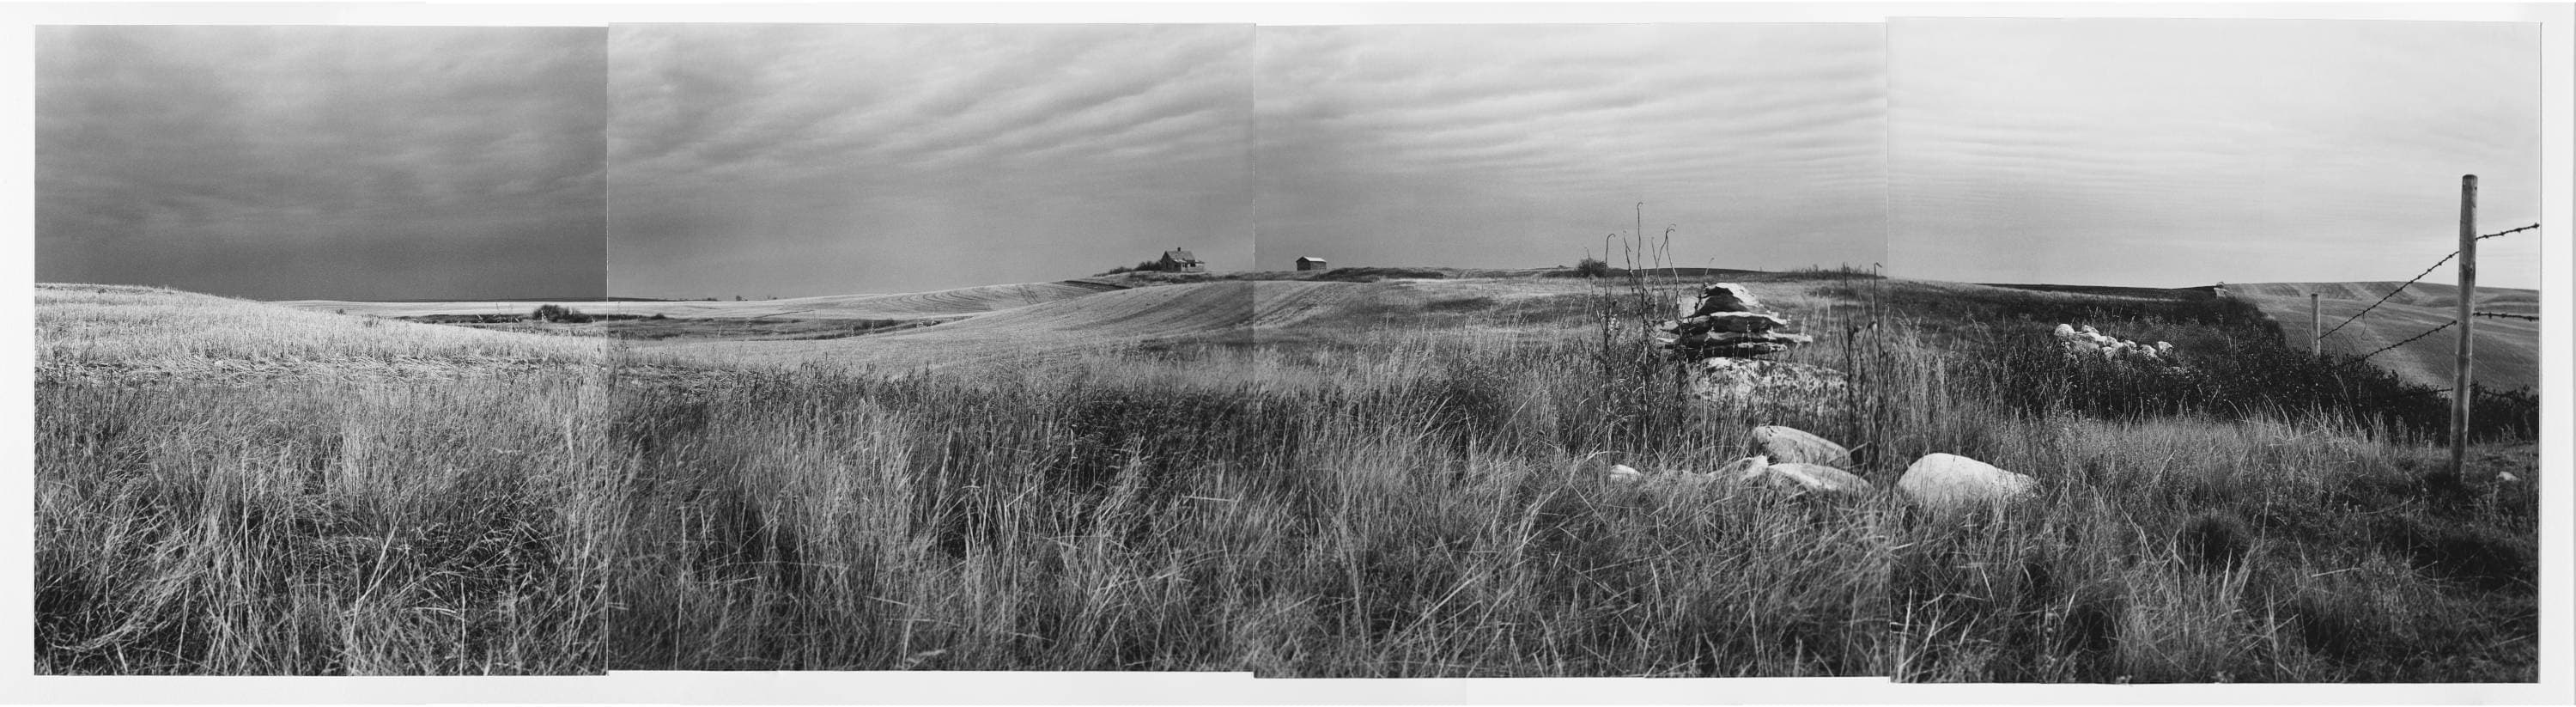 Black and white four panel panorama: grassy landscape with big white rocks on one side, dramatic prairie sky with a small homestead seen in the distance.